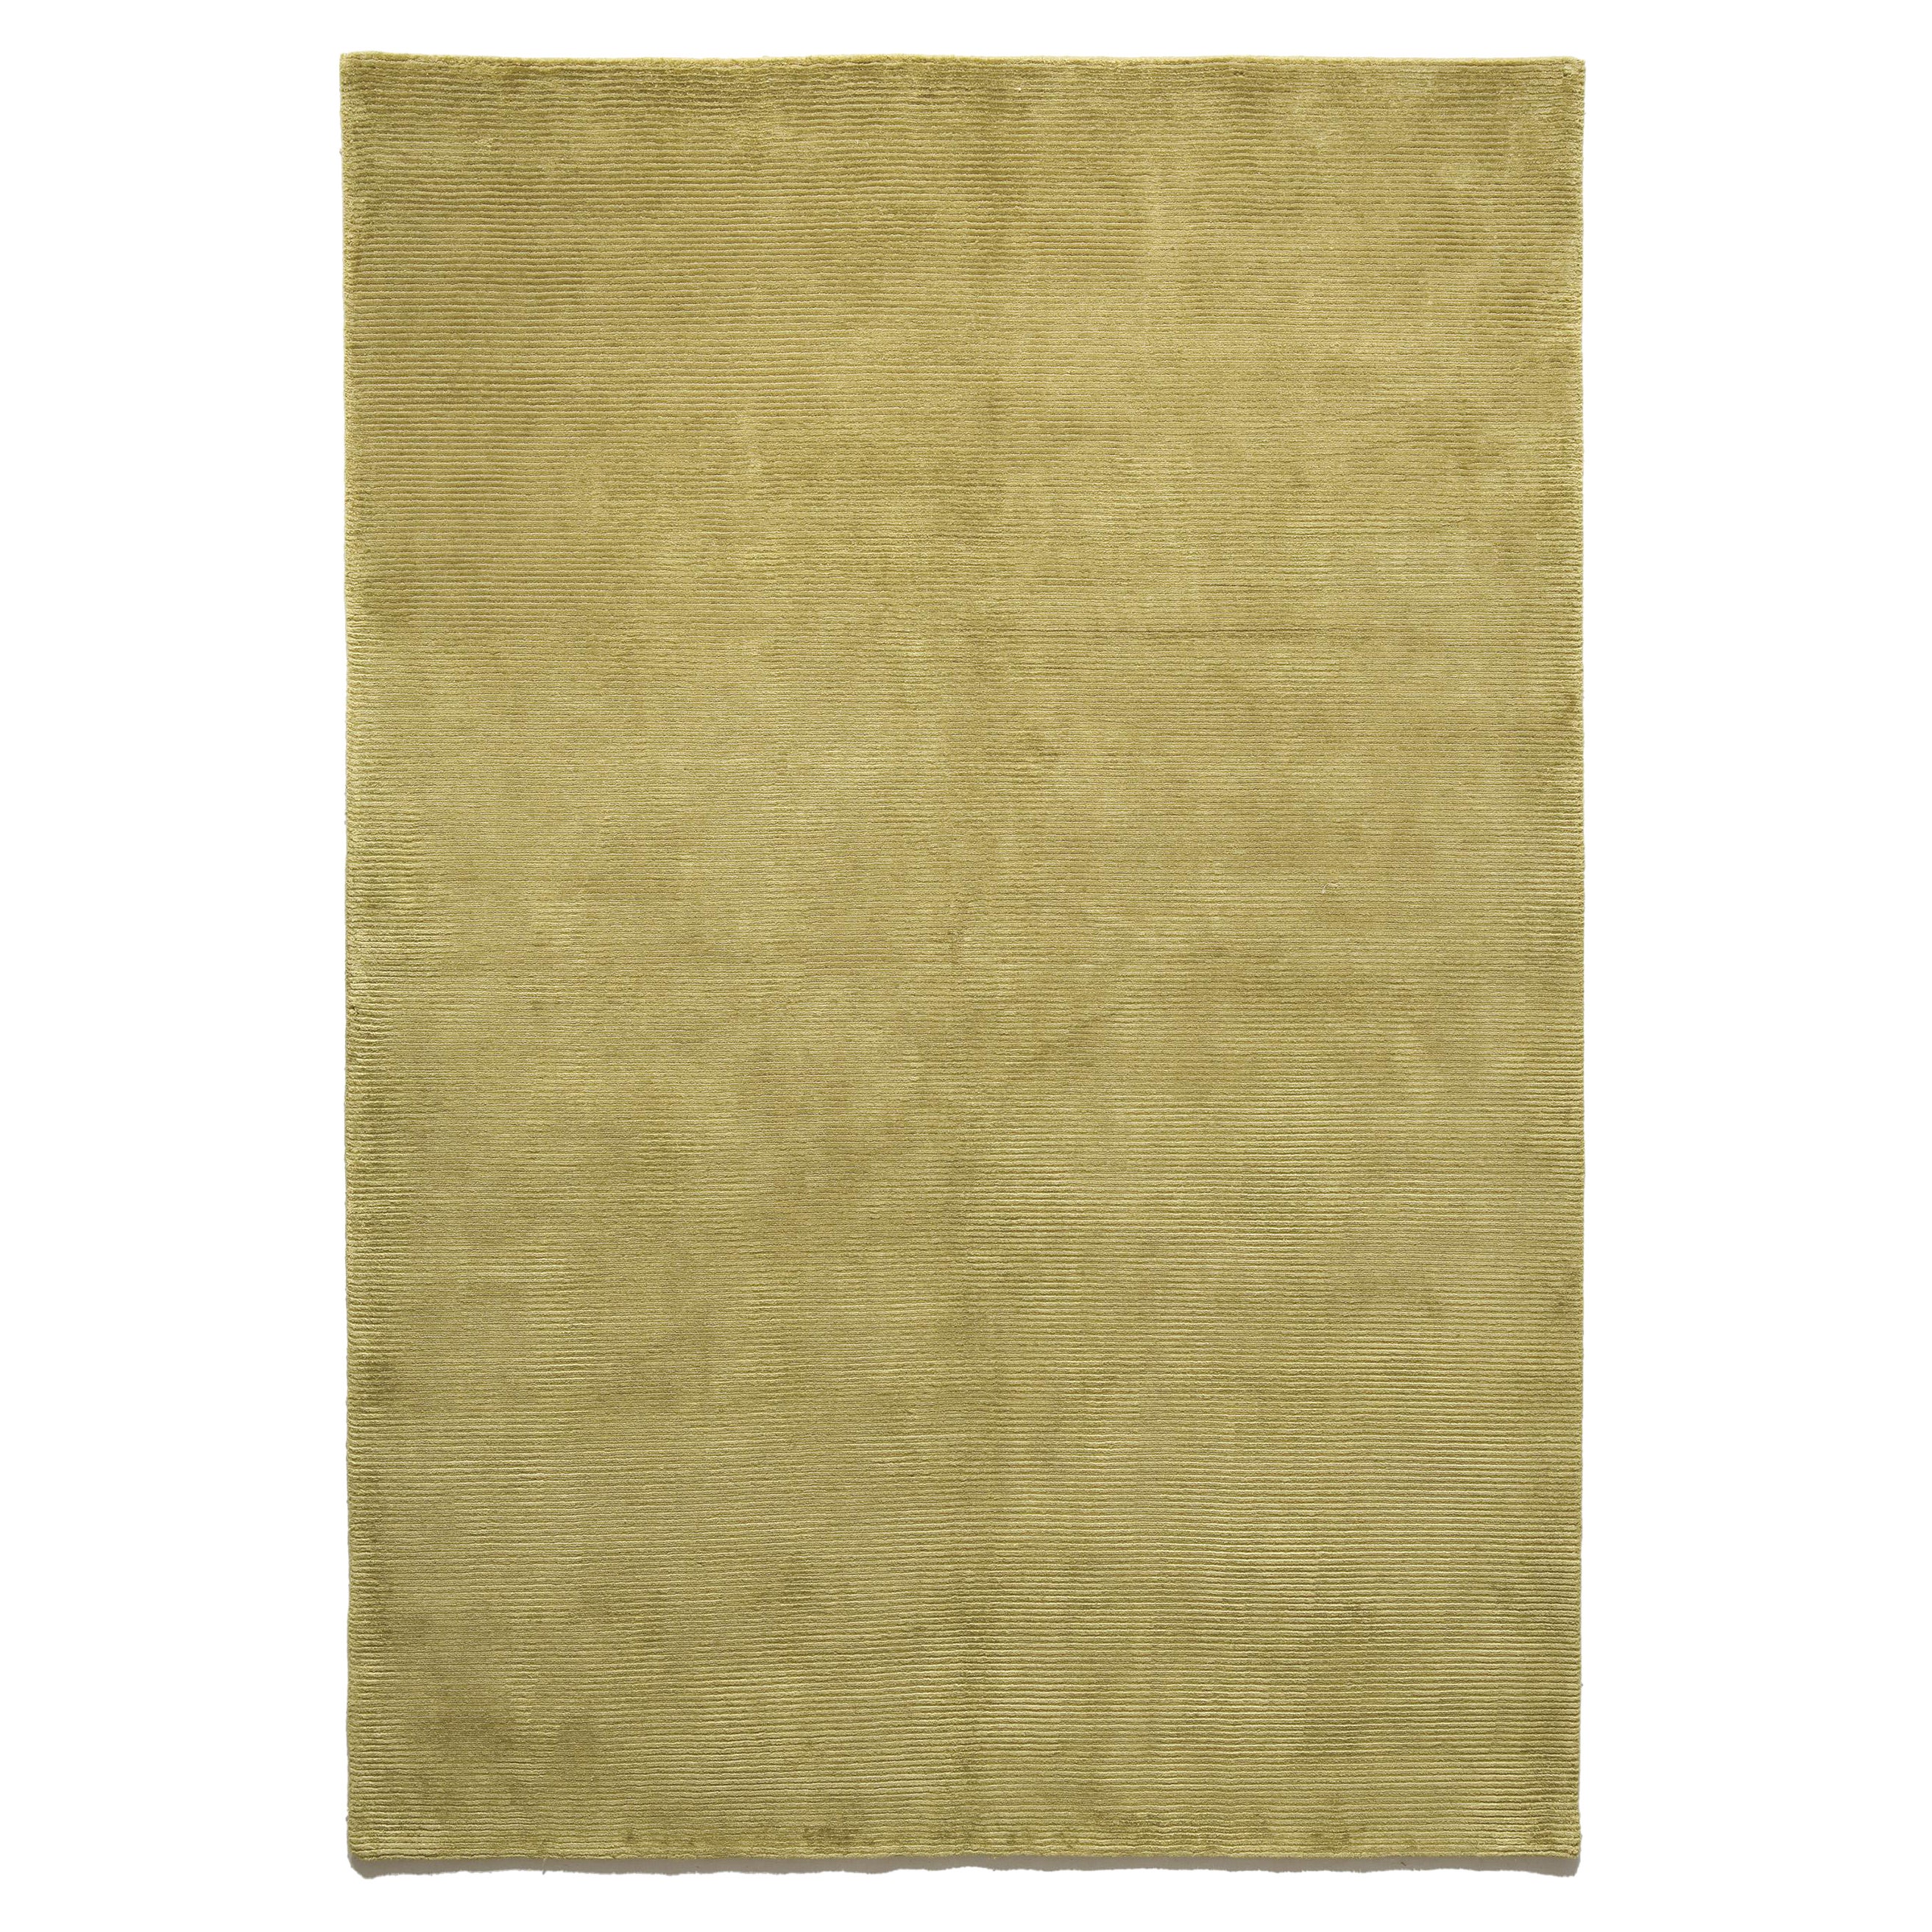 Luxury Modern Hand-Knotted Stripes Gold 12x15 Rug